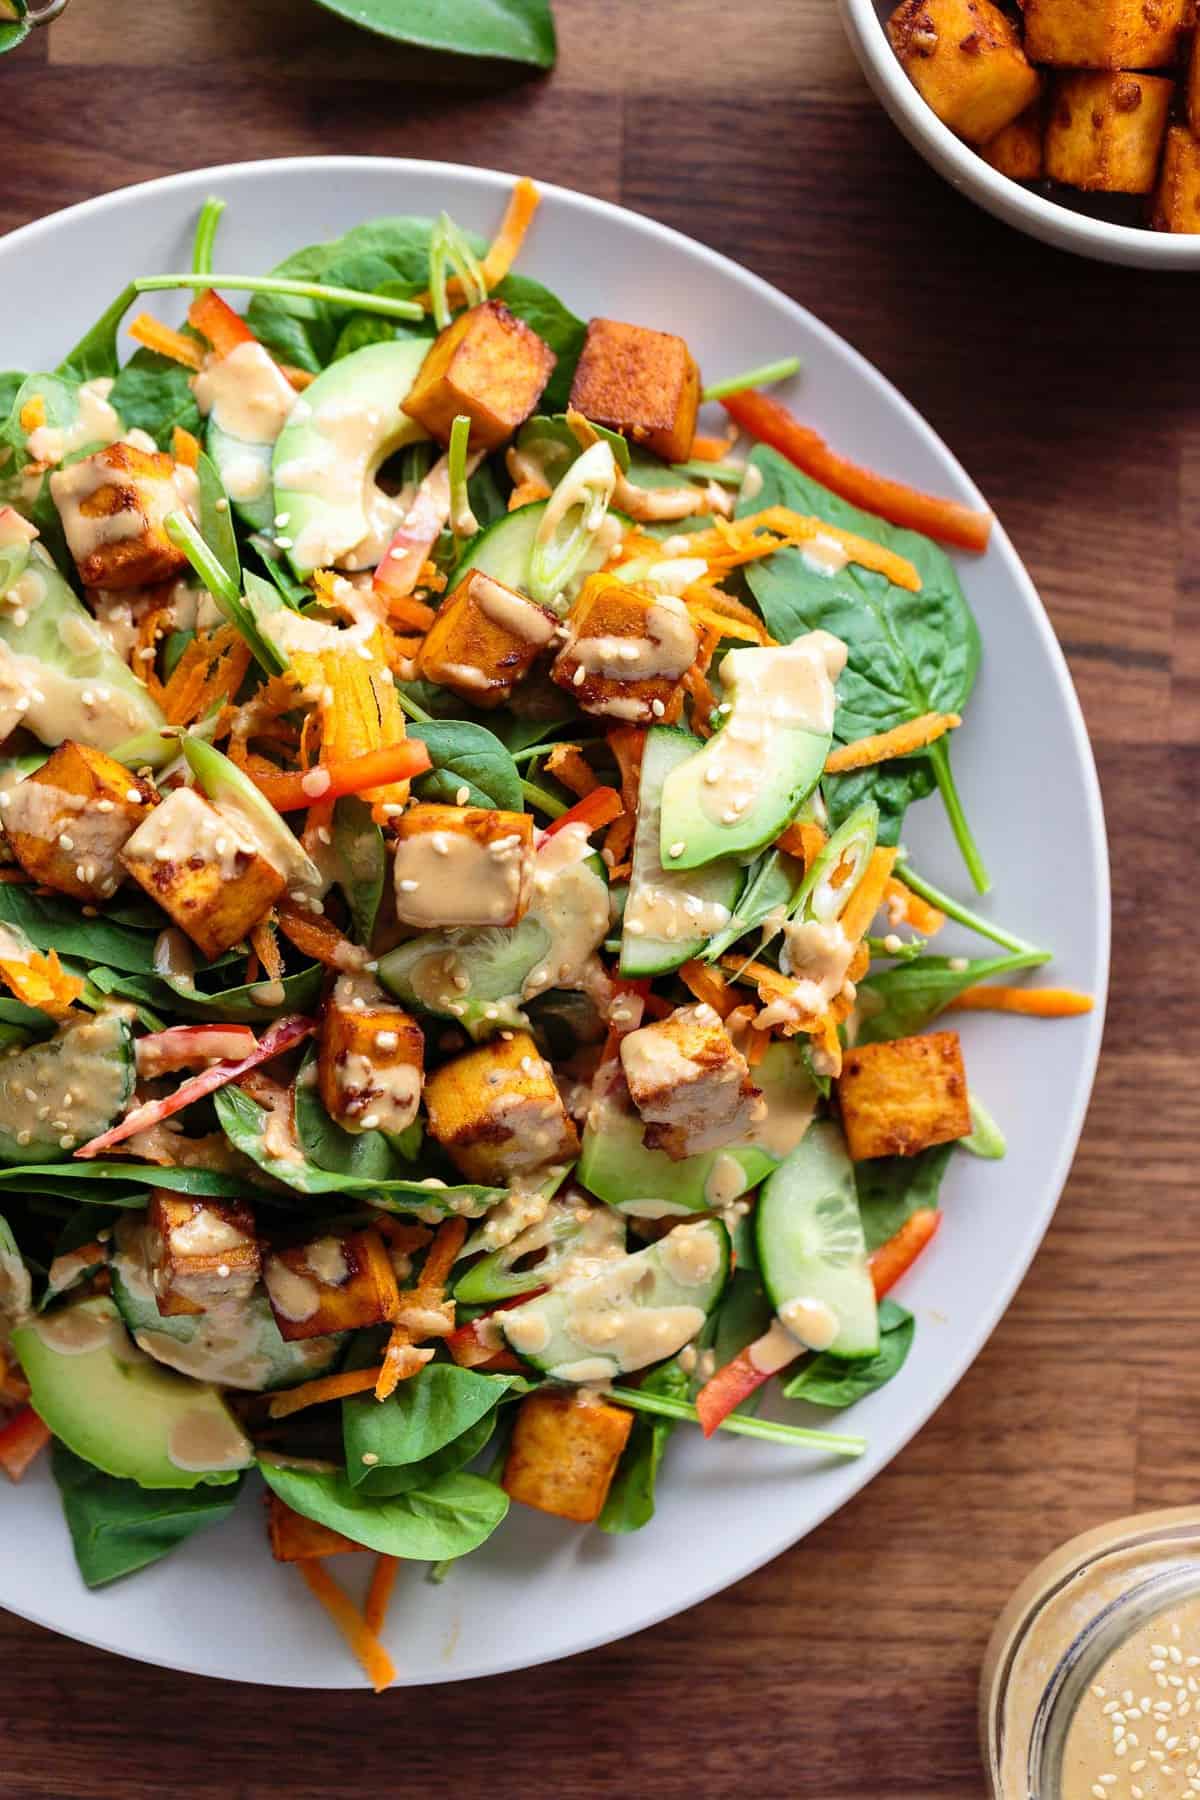 Salad of baby spinach, marinated tofu, avocado, carrot, cucumber, red bell pepper, green onion with a creamy toasted sesame and soy dressing.